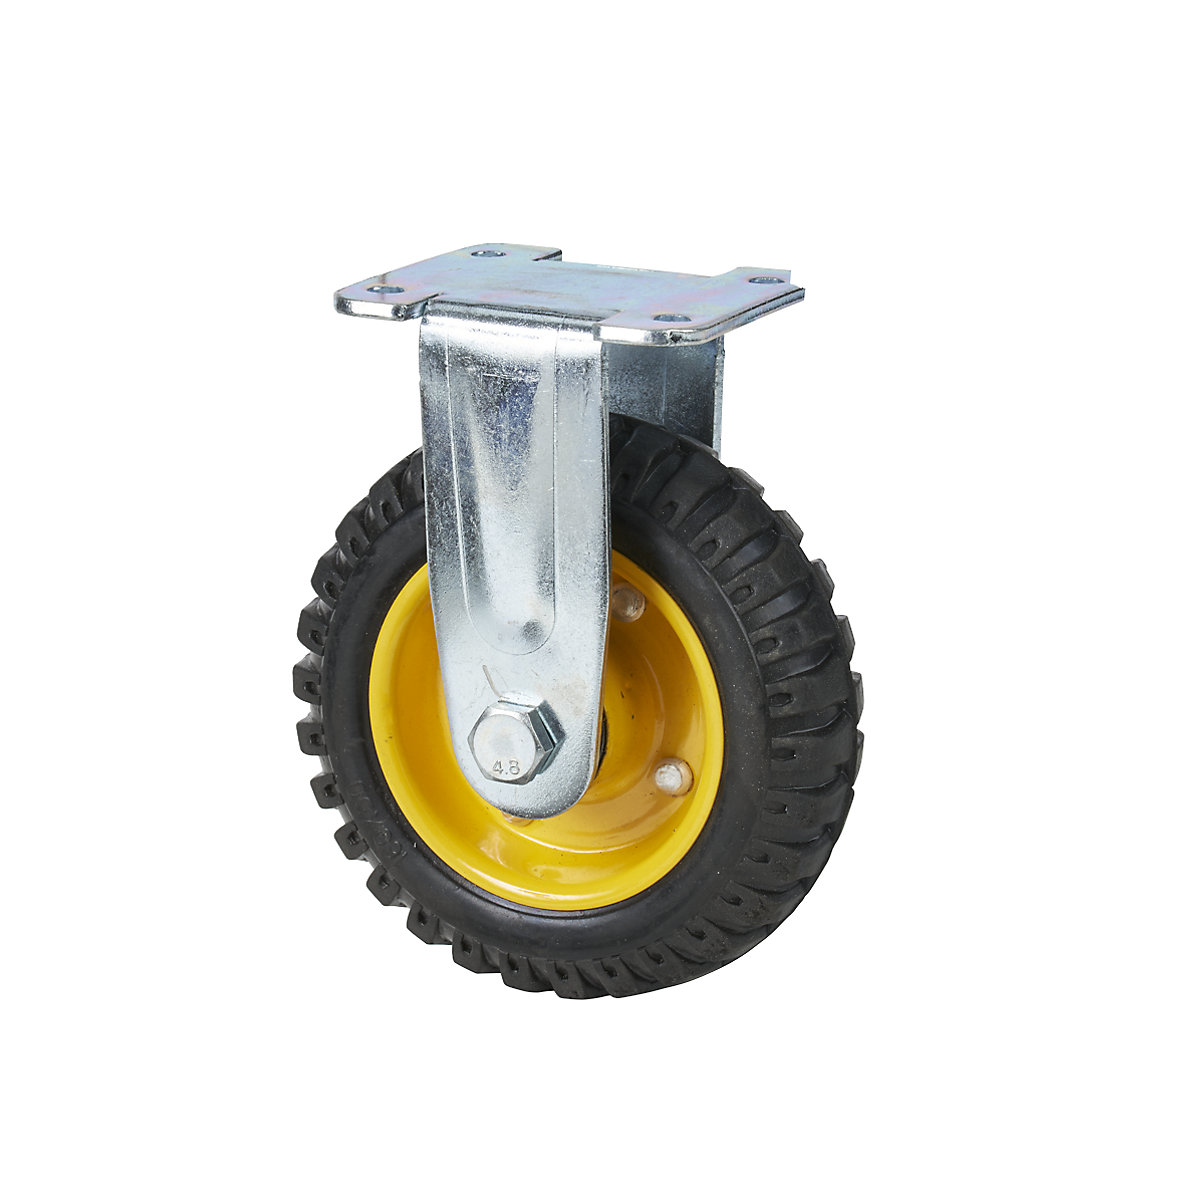 Fixed castor, solid rubber tyres